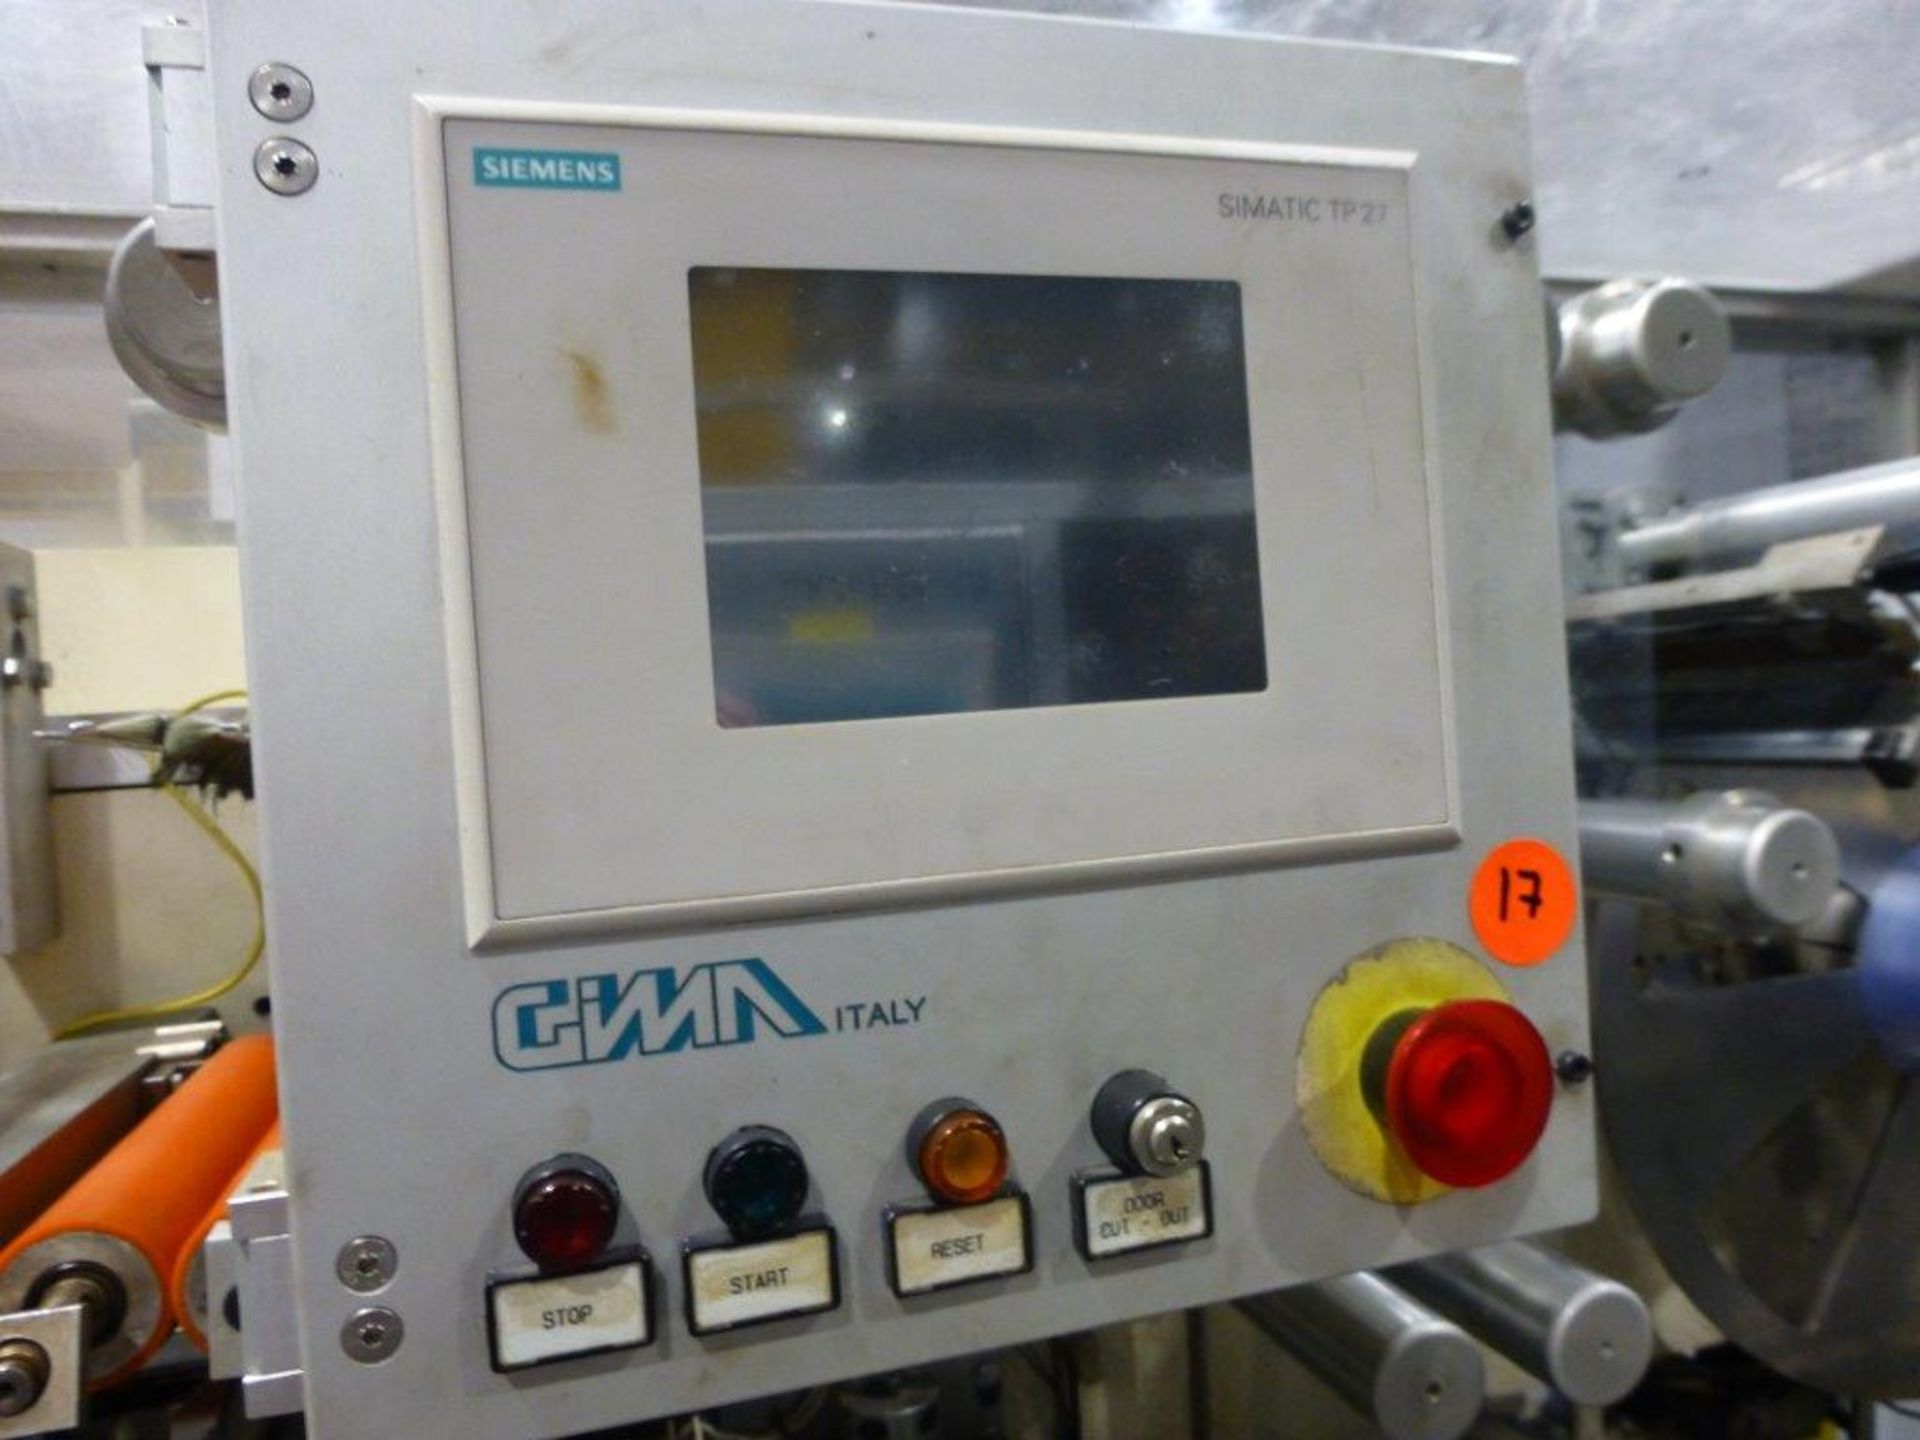 GIMA Type 884 DVD CNC Rotary Thermal Welding Machine Serial No. 88455FO (2003) with turnover unit. - Image 4 of 5